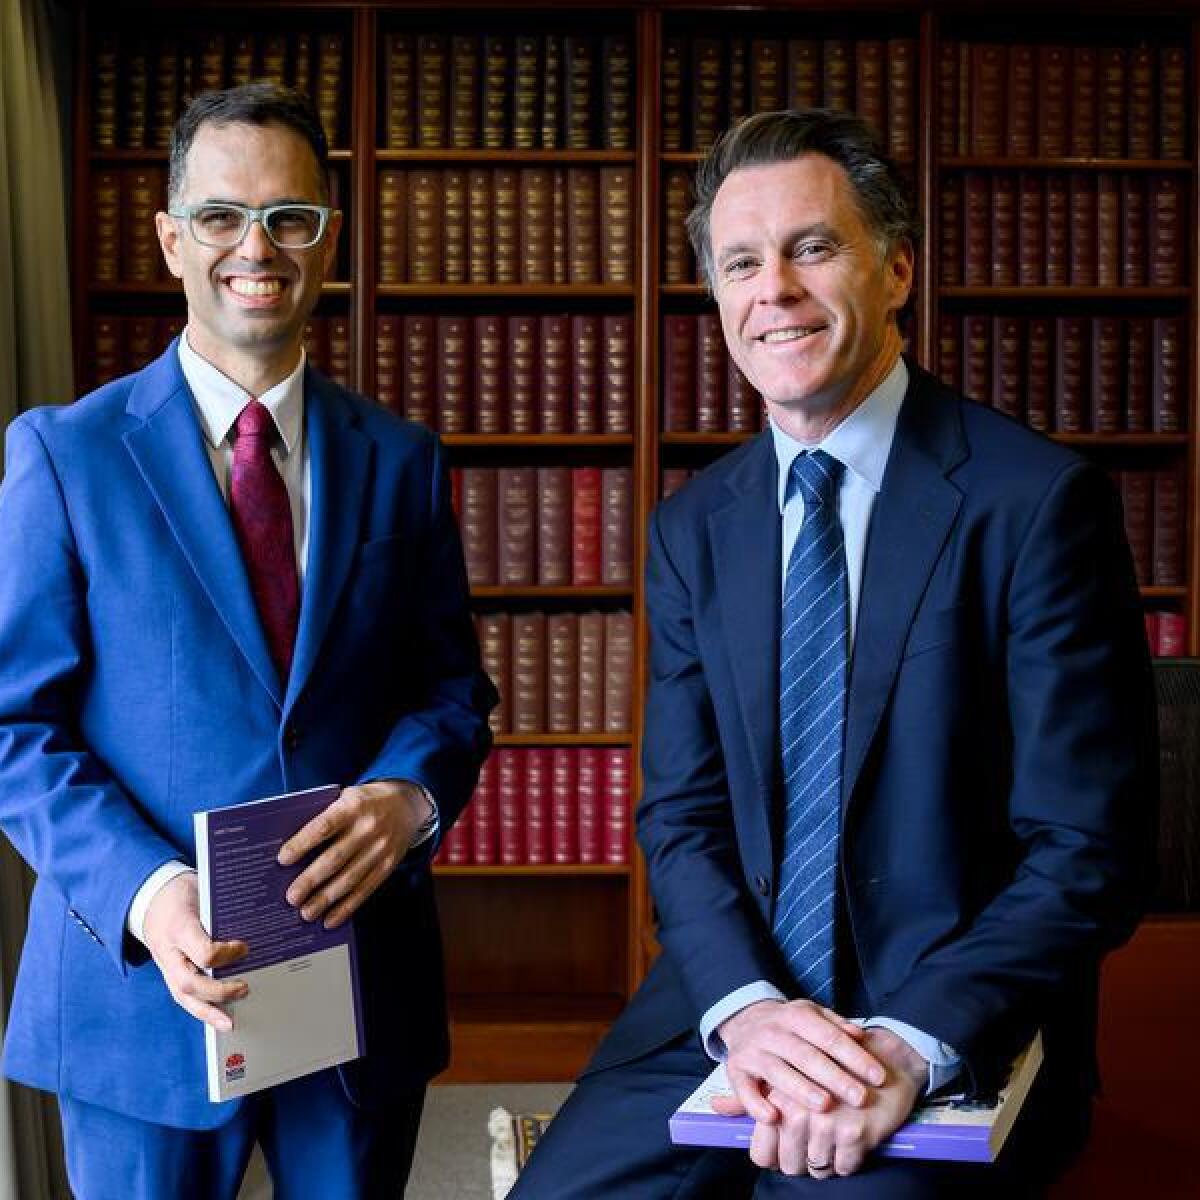 The NSW treasurer and premier stand in front of a bookshelf.